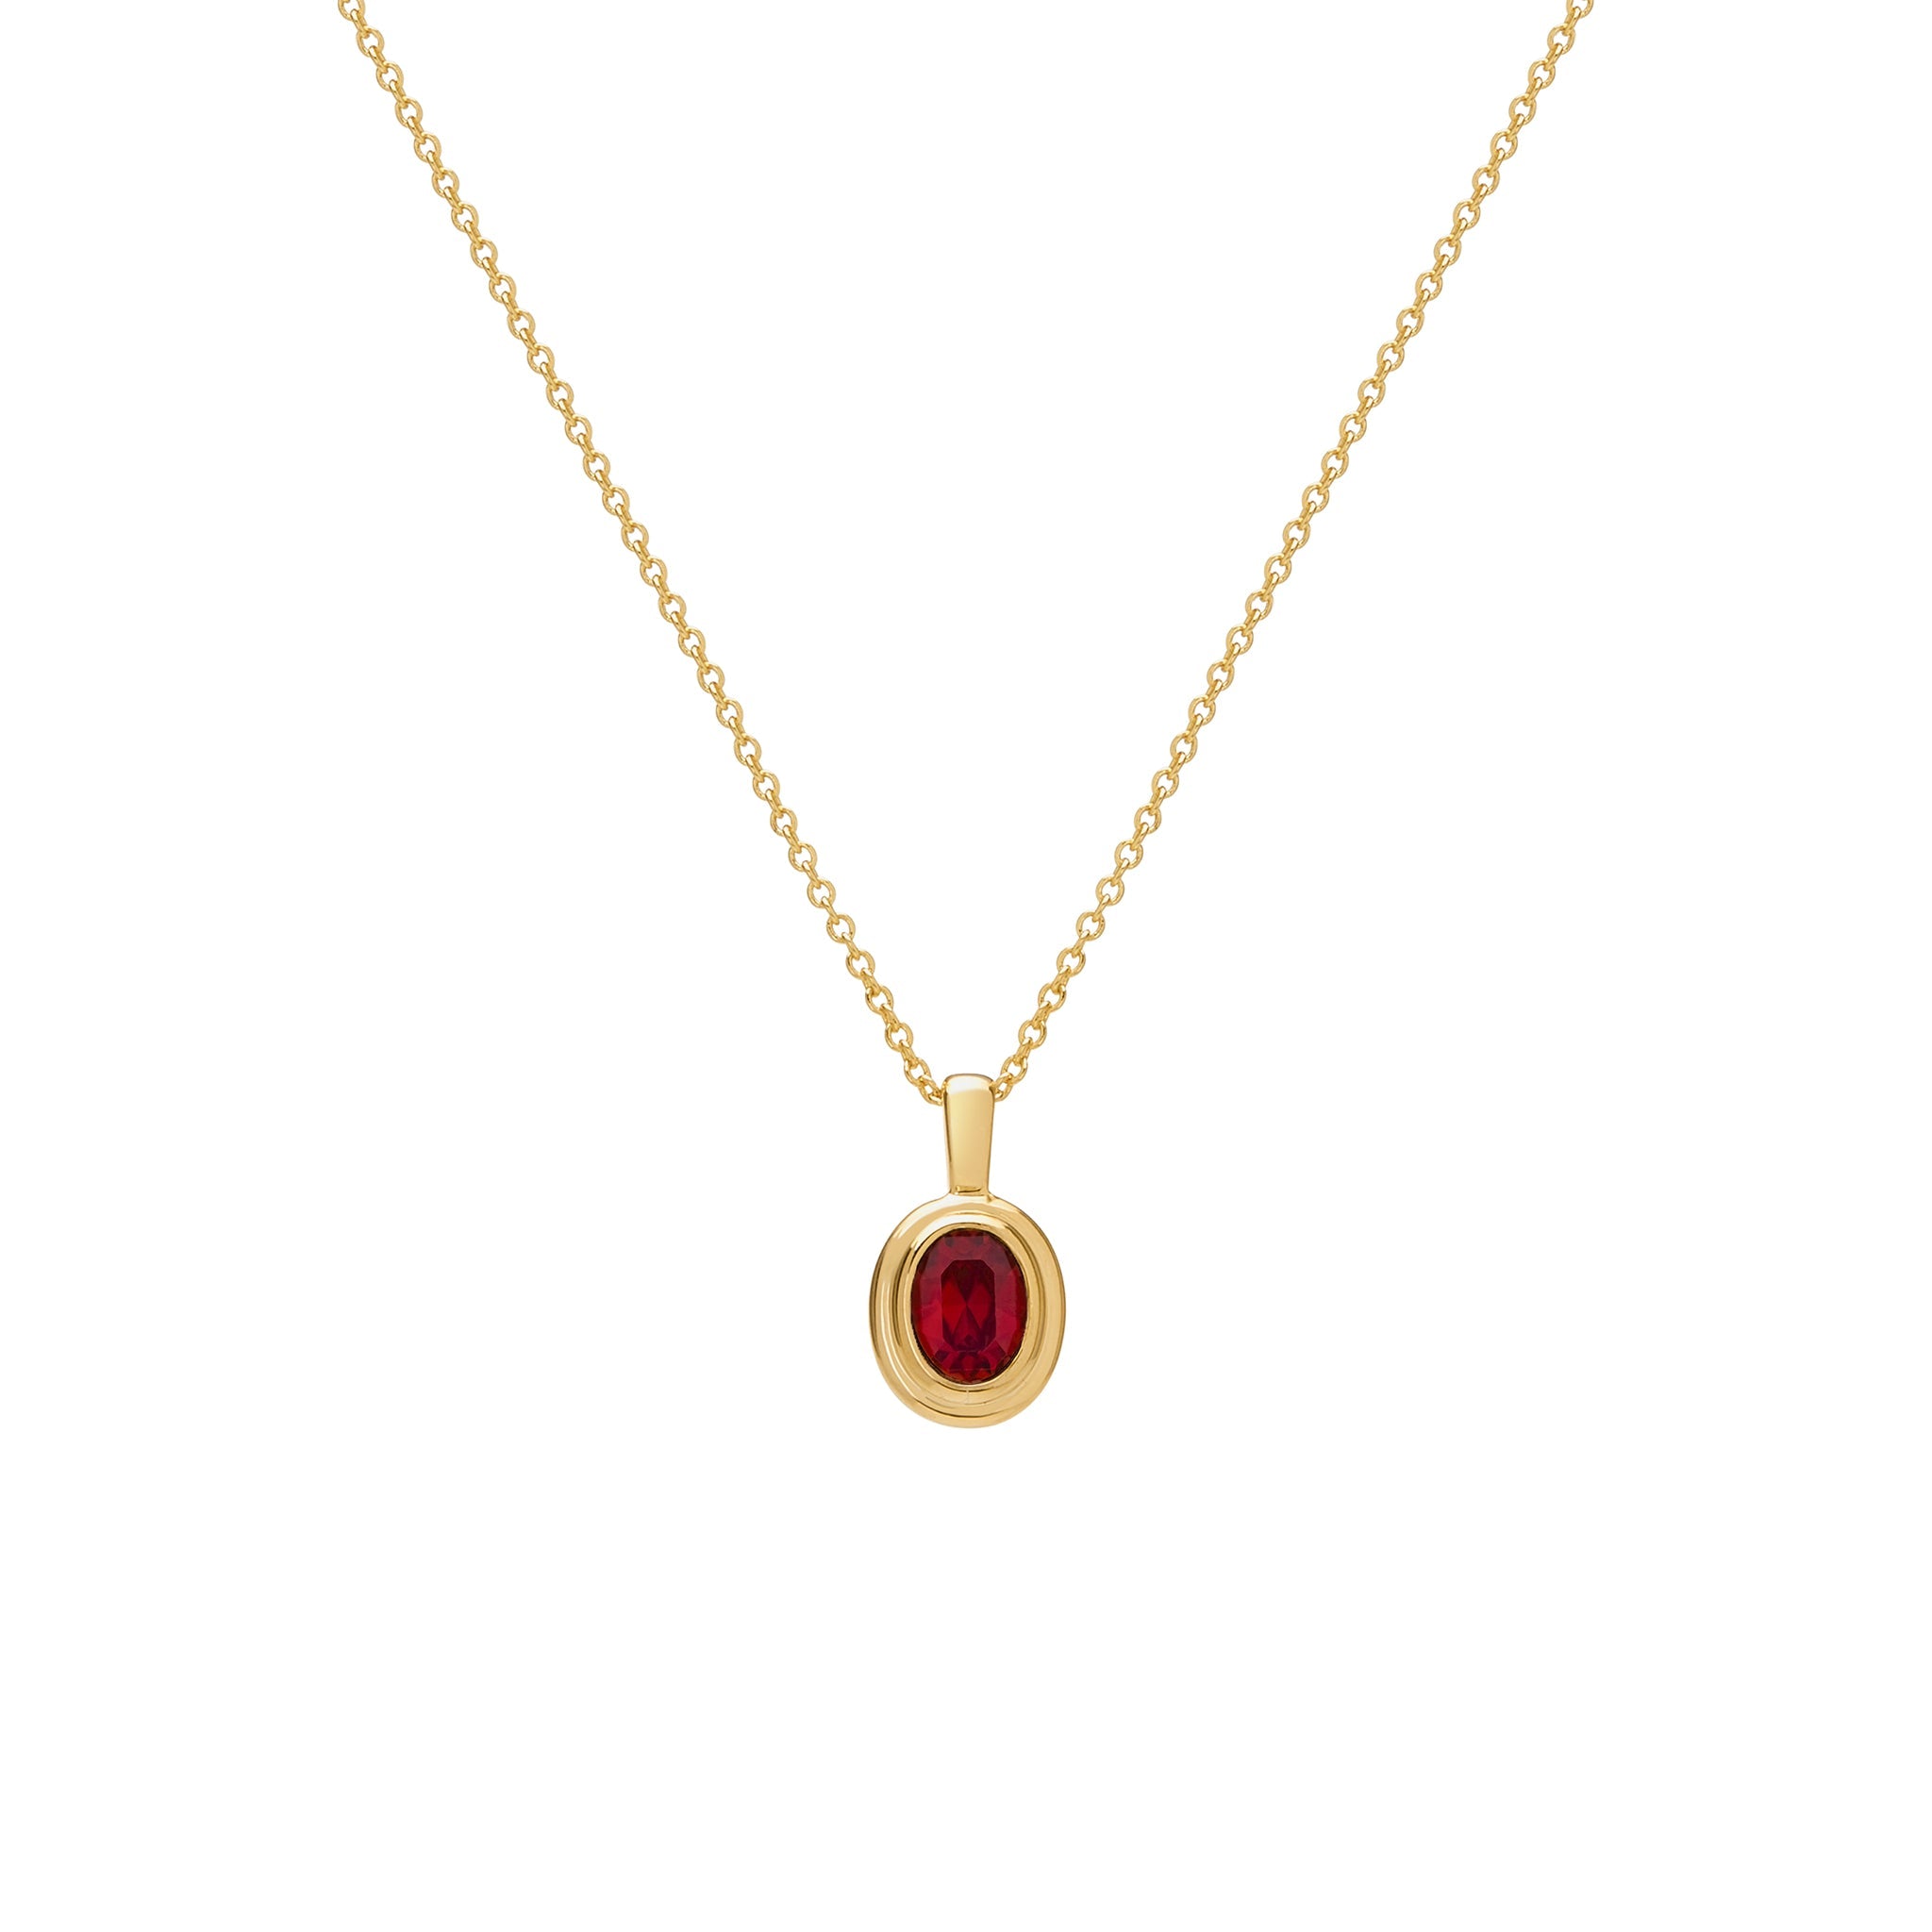 Serenity Necklace - Ruby red